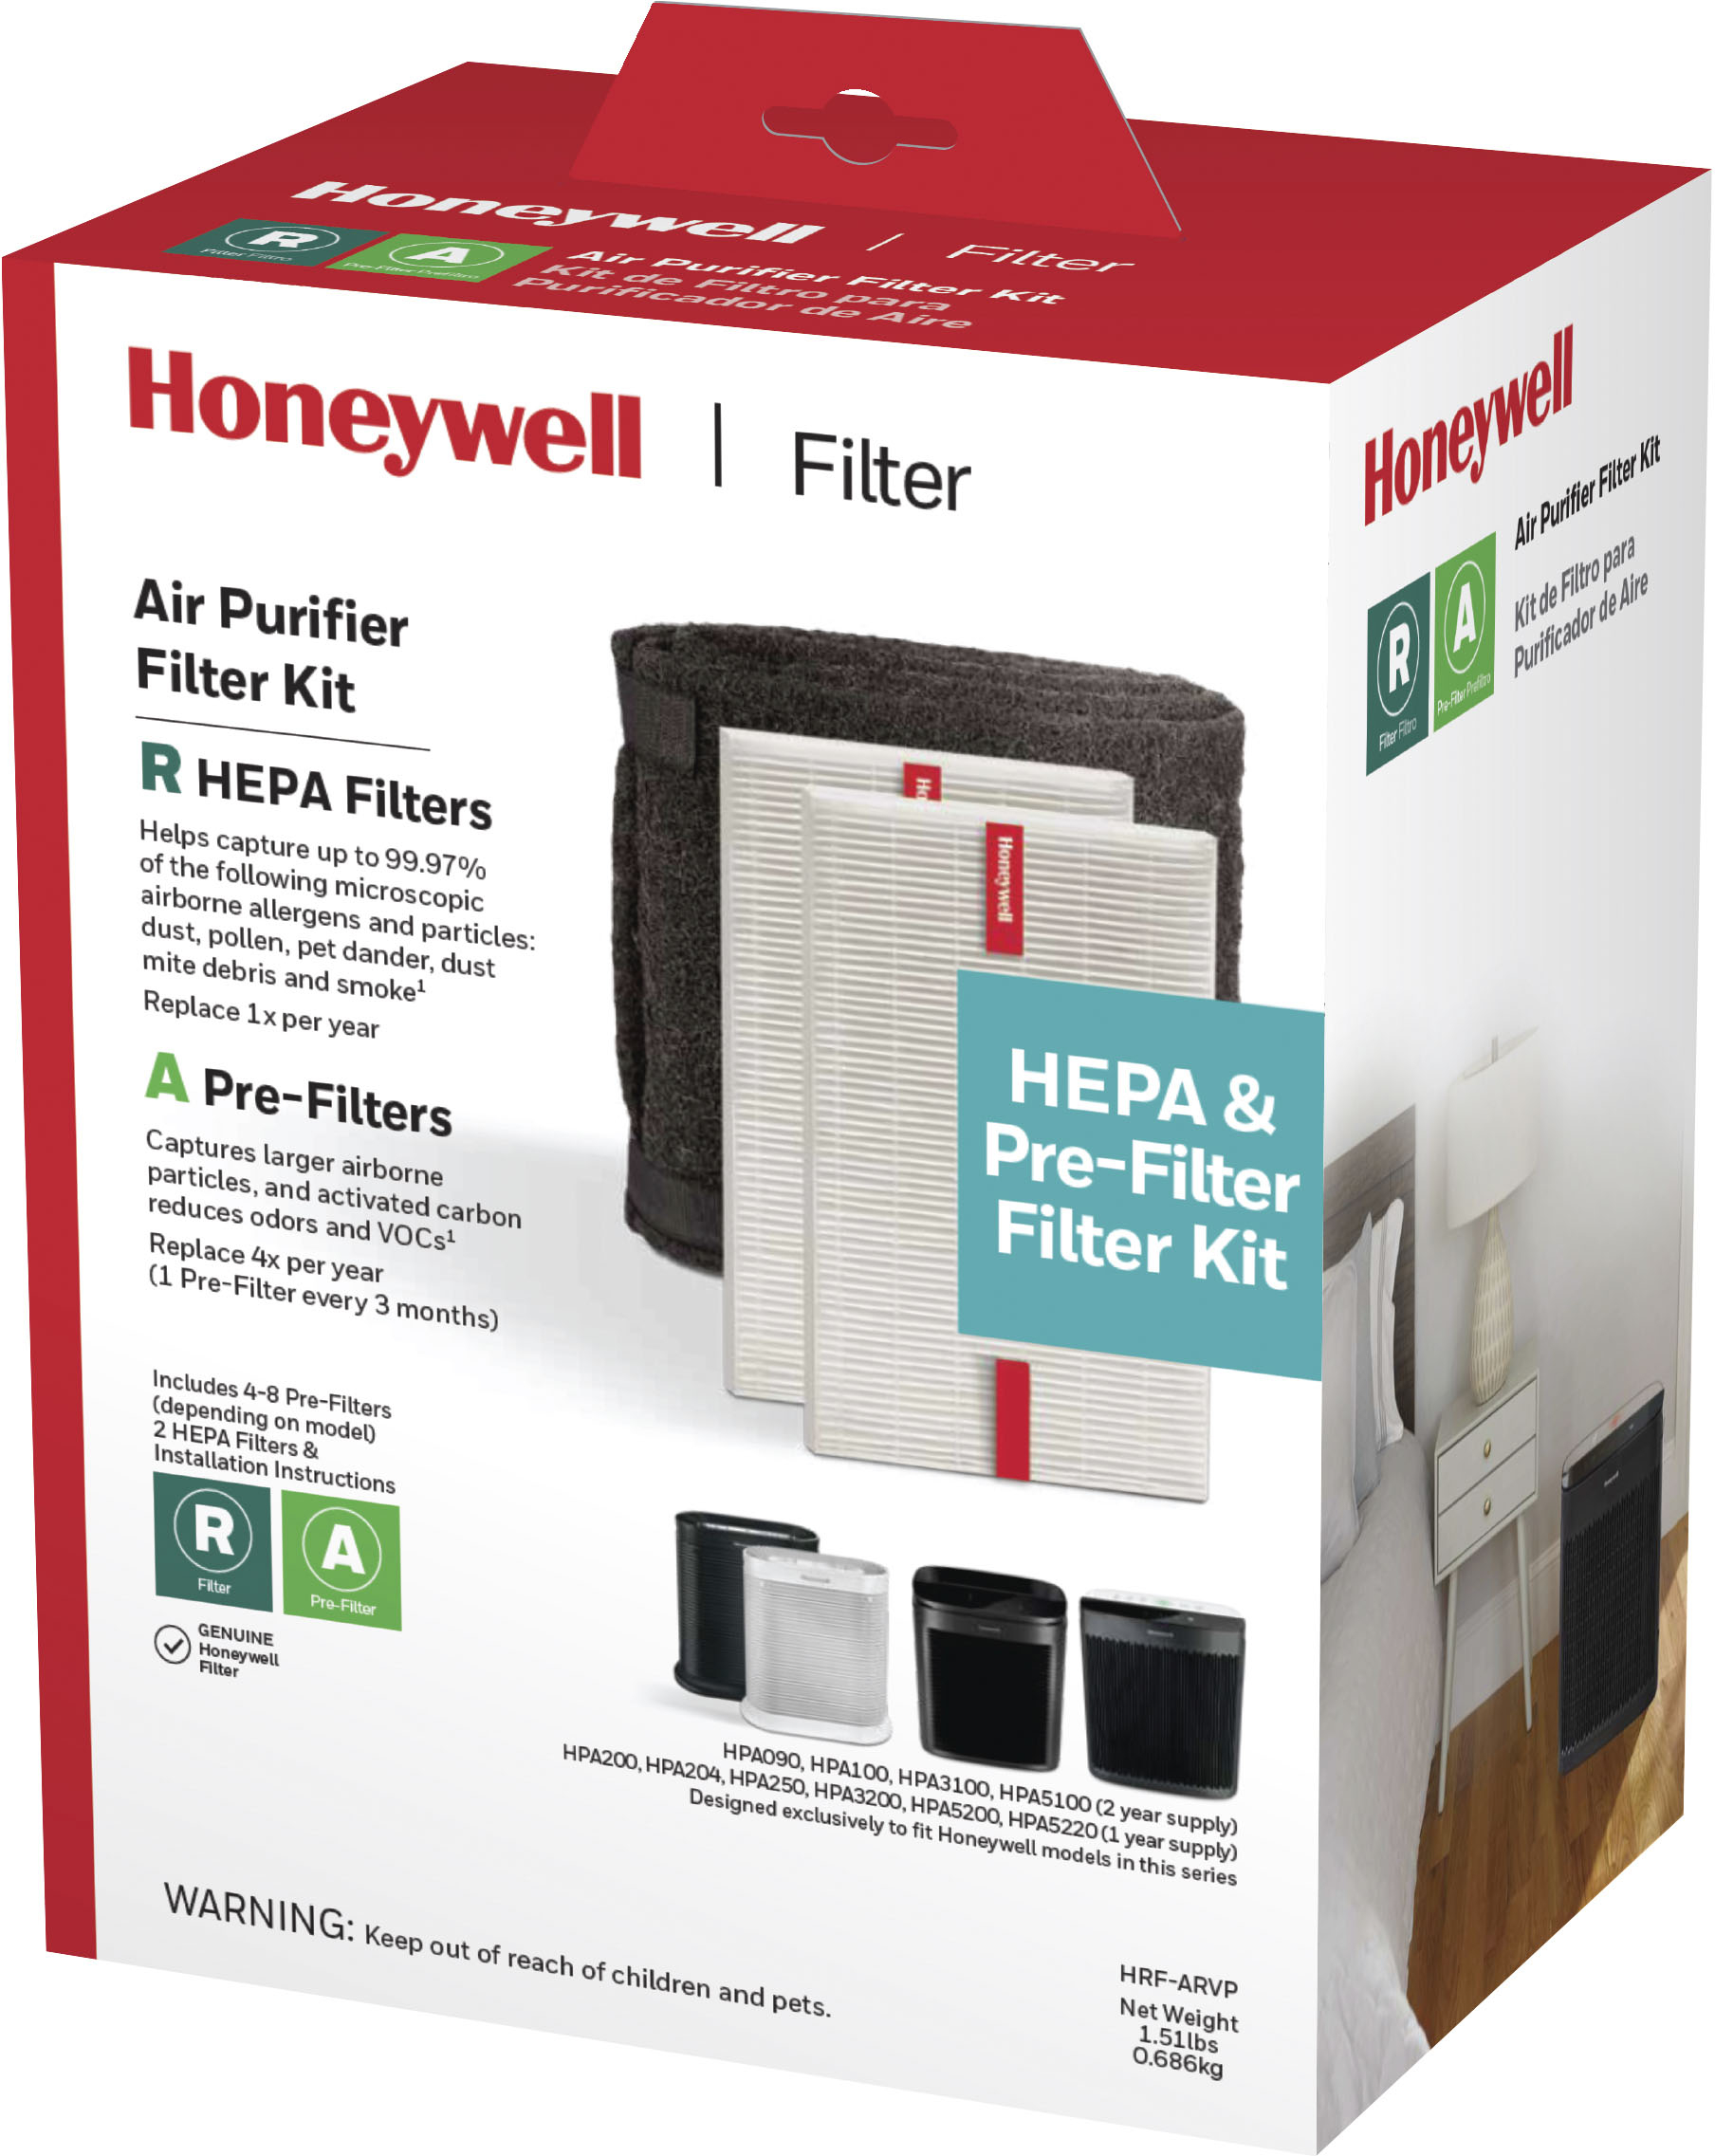 Honeywell HEPA Air Purifier Filter Value Kit - A and R Filters - Black White